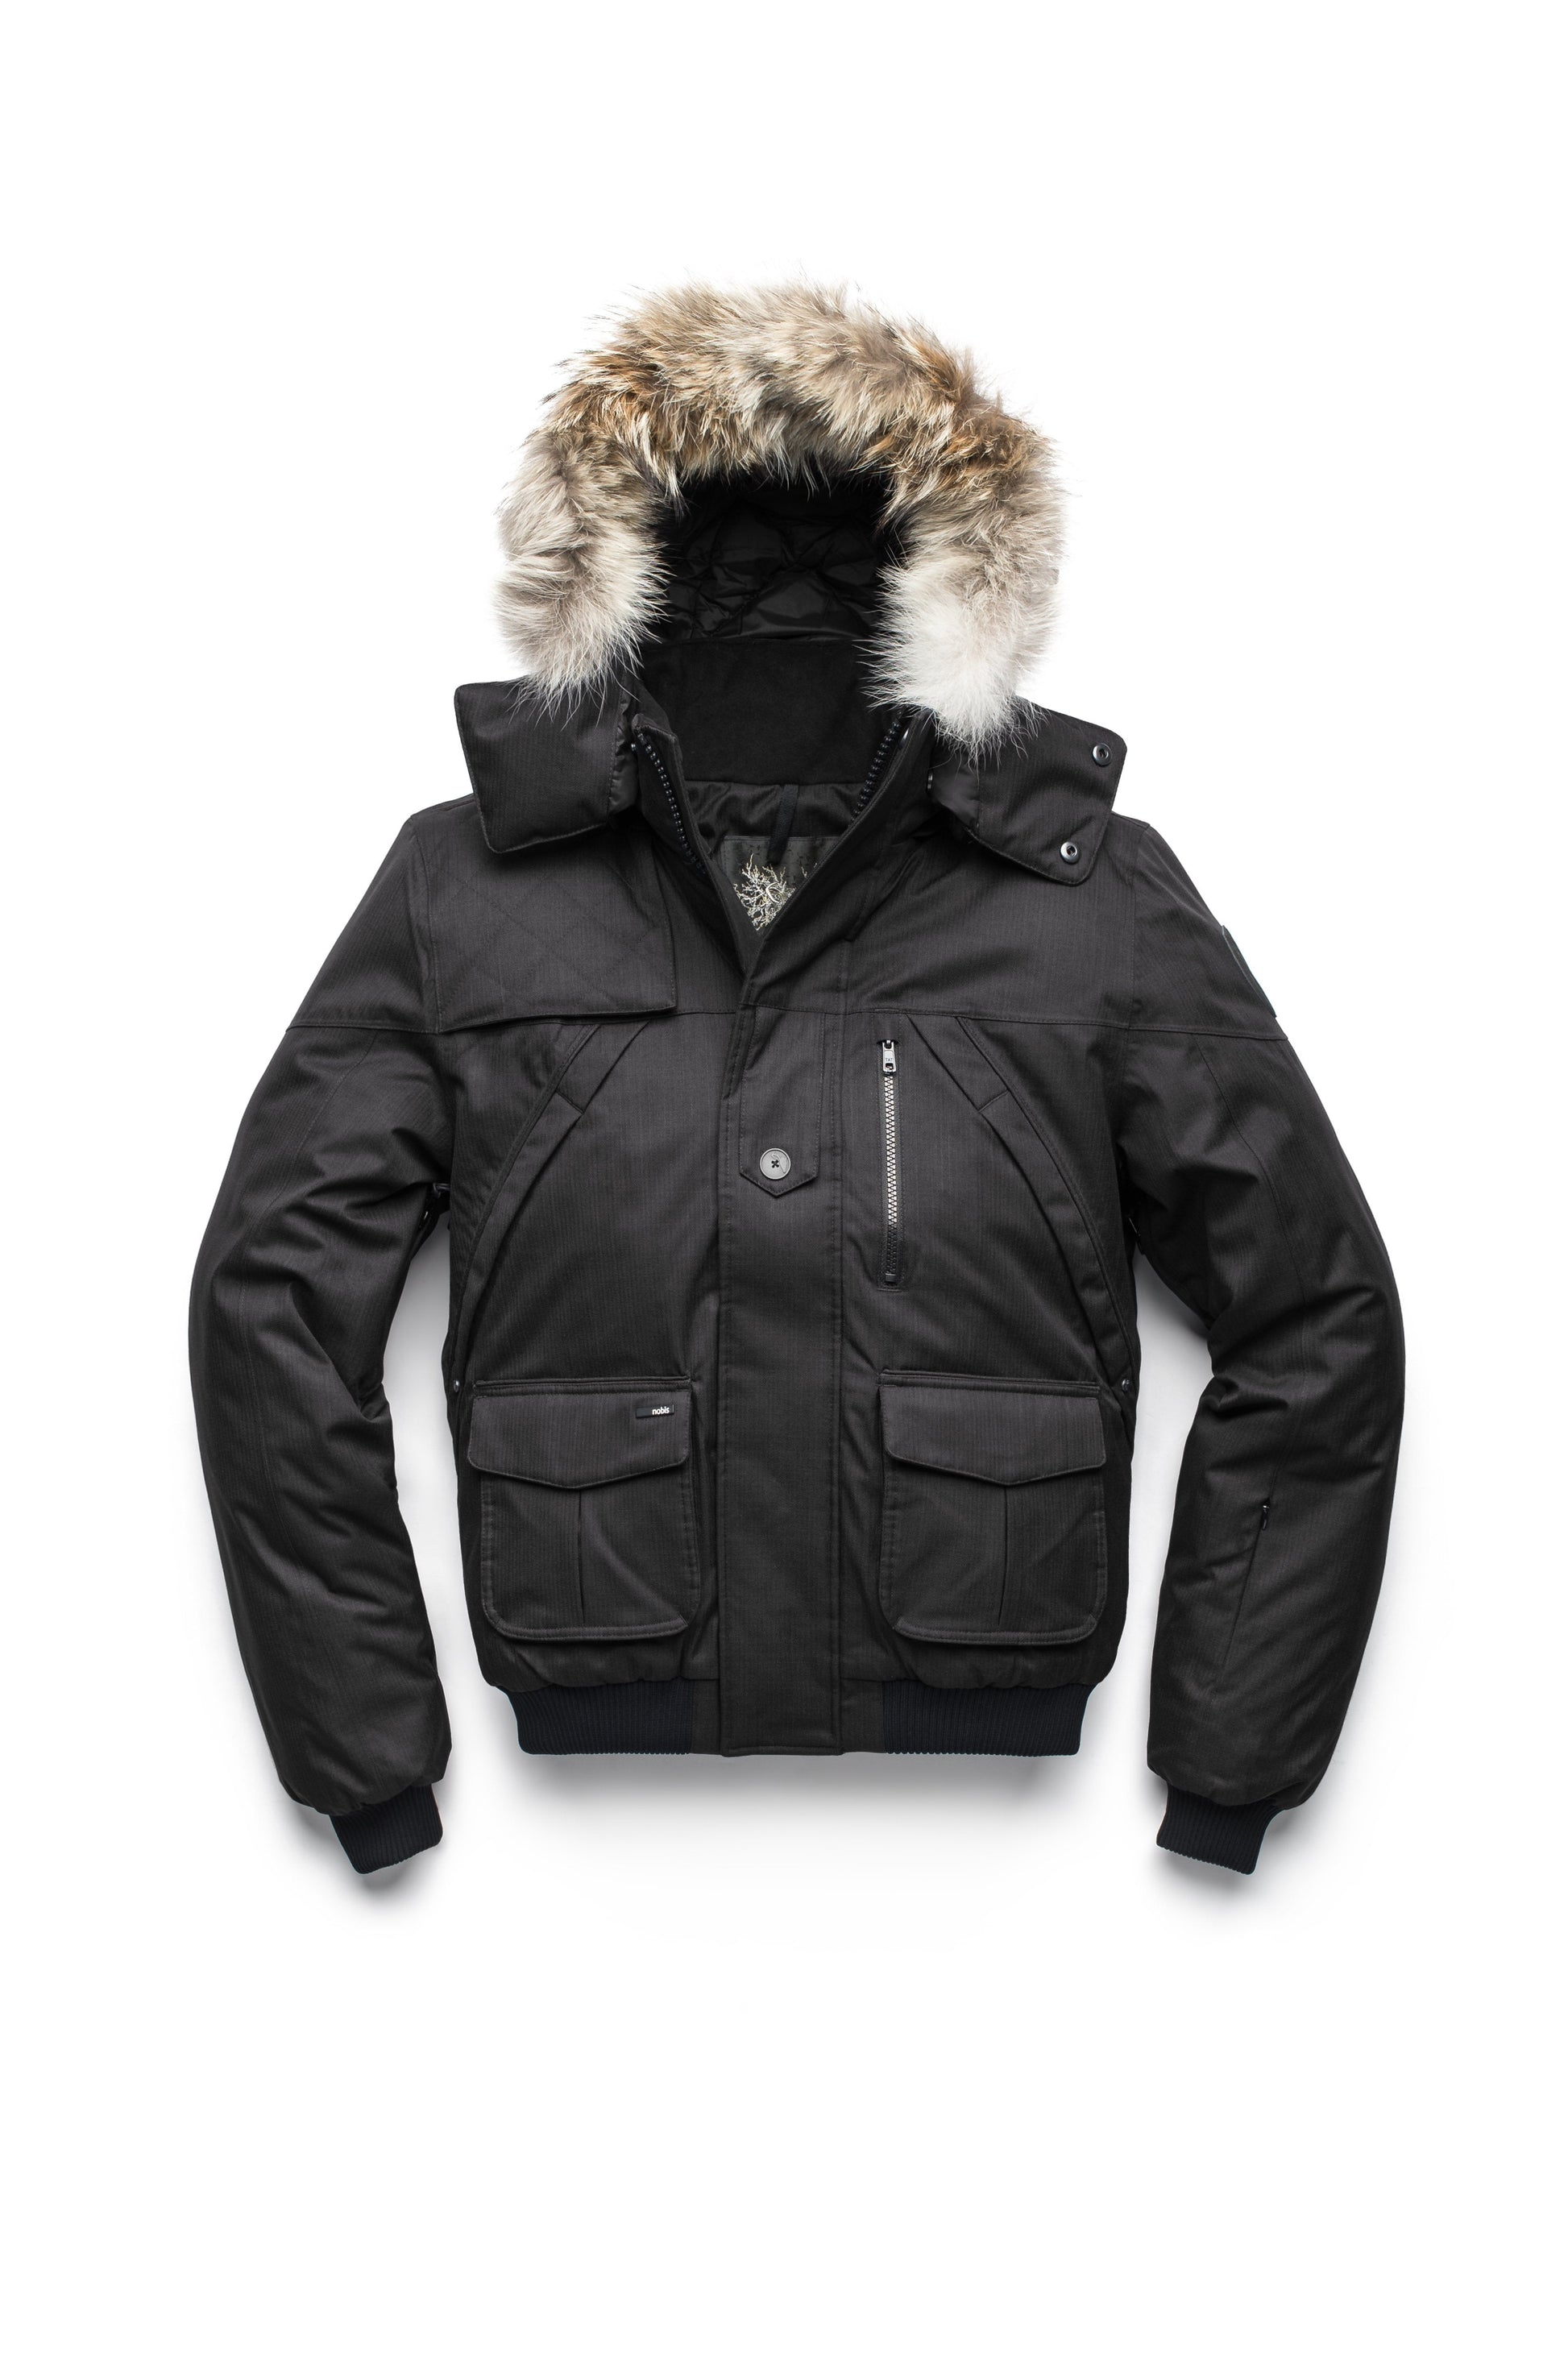 Men's classic down bomber with two patch pockets and a right shoulder storm flap in CH Black